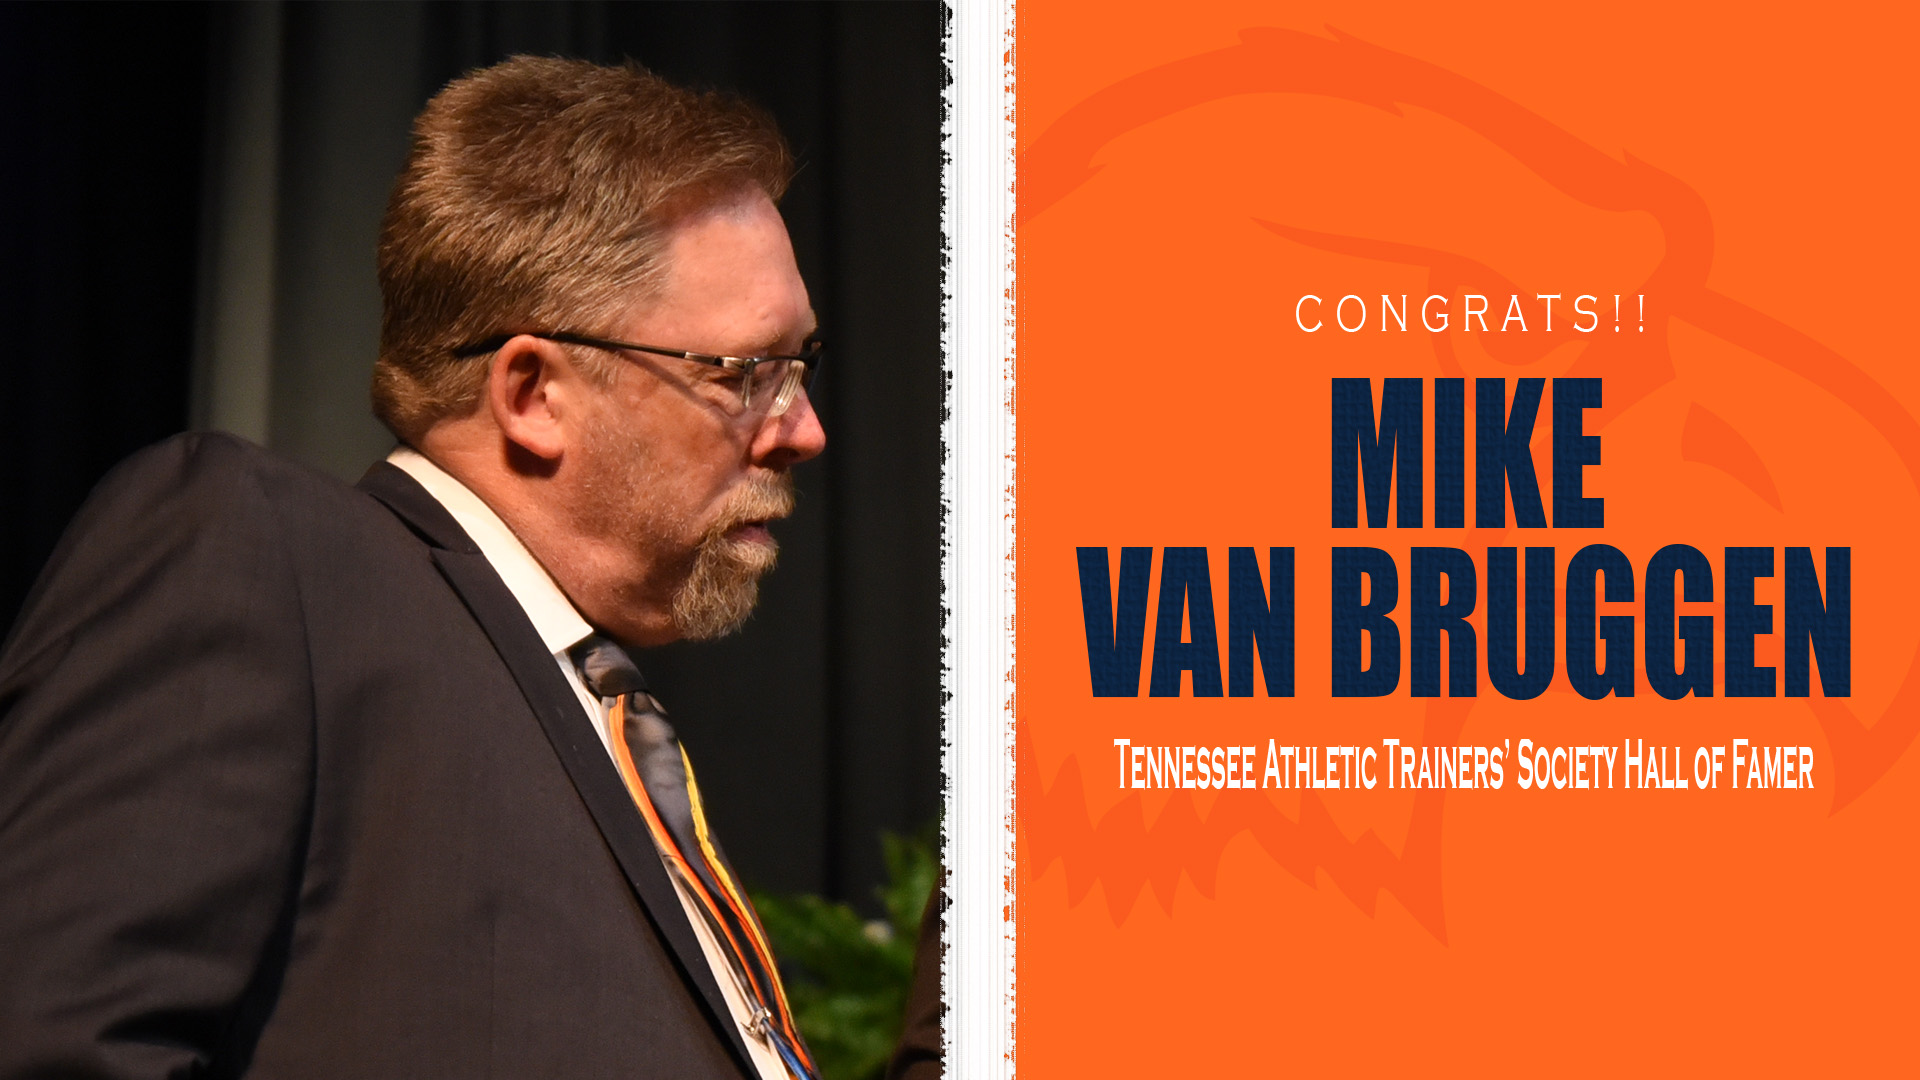 Van Bruggen to be inducted into TATS Hall of Fame